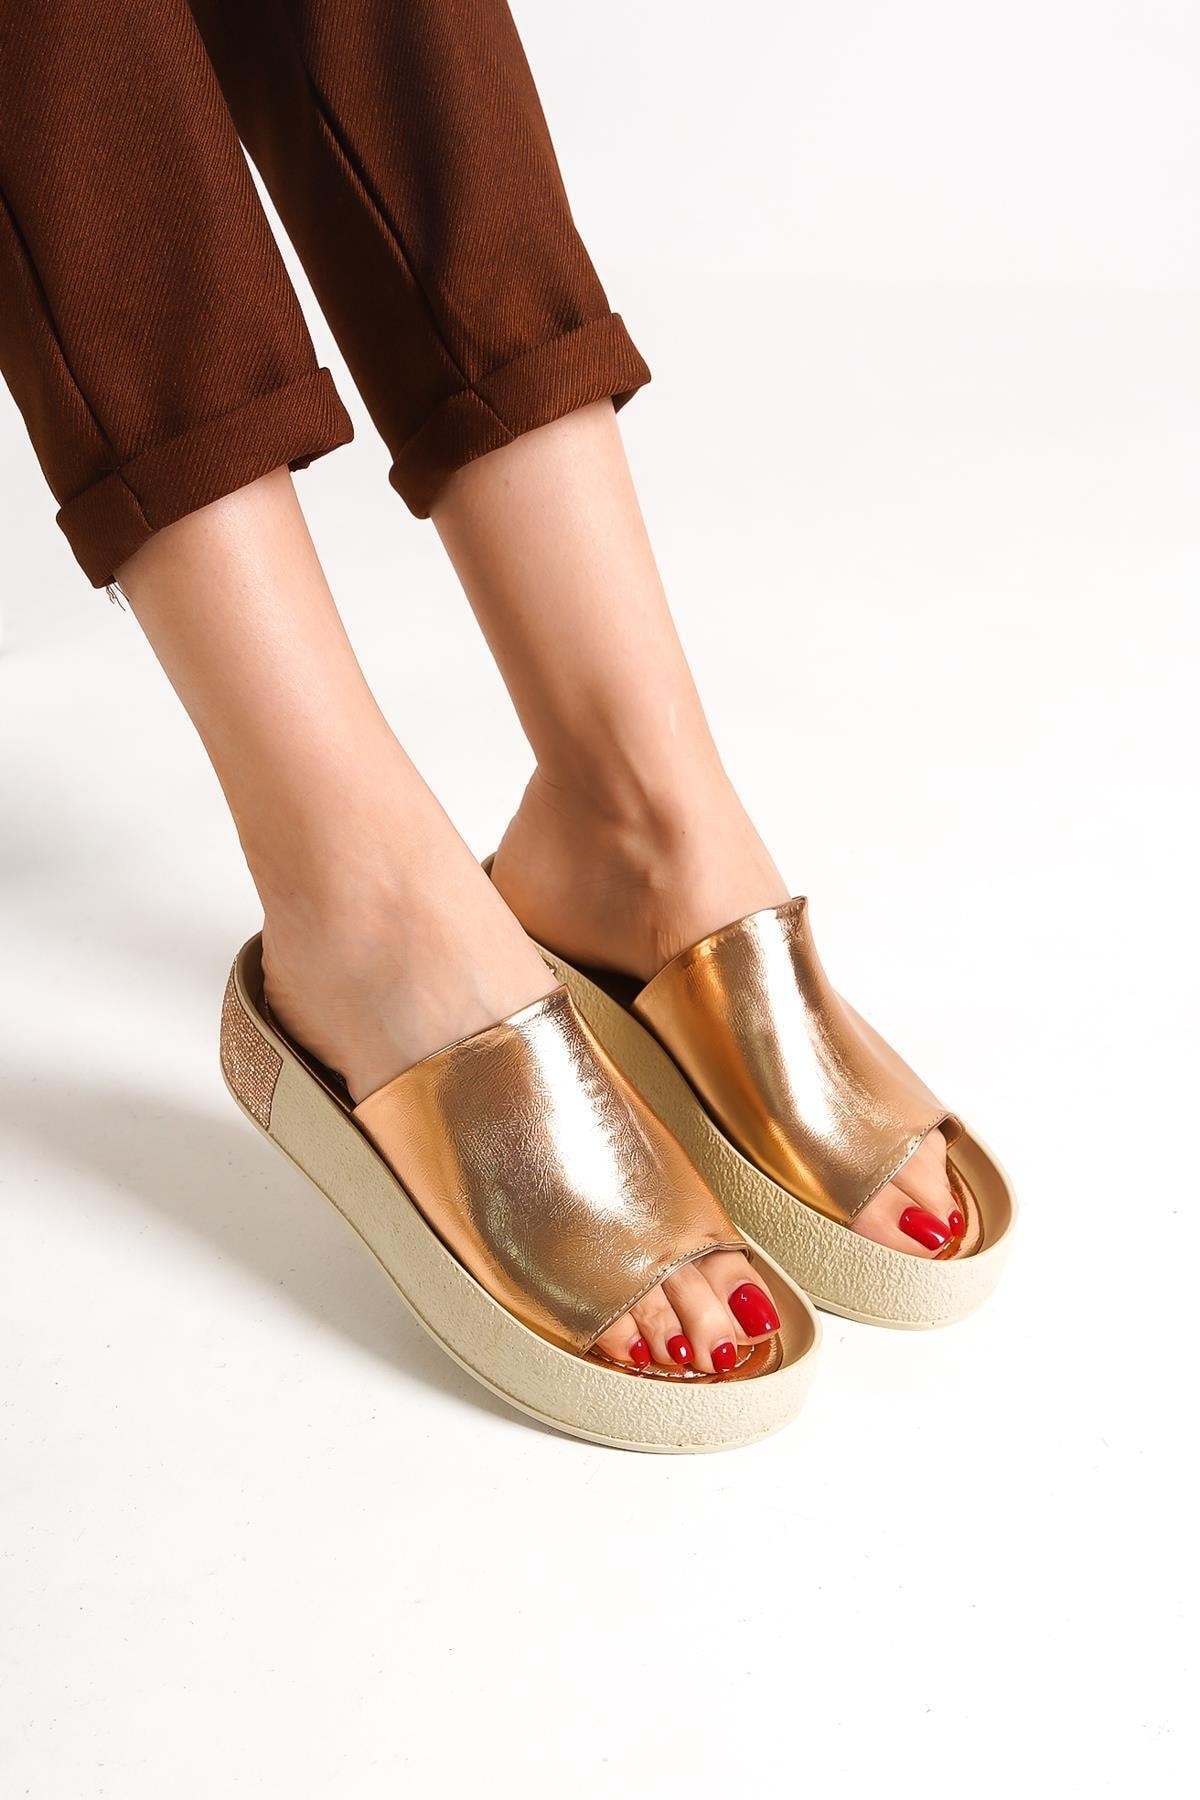 Capone Outfitters Capone Single Wide Strap with Stones Stitched Detailed Wedge Heel Women's Metallic Slippers.